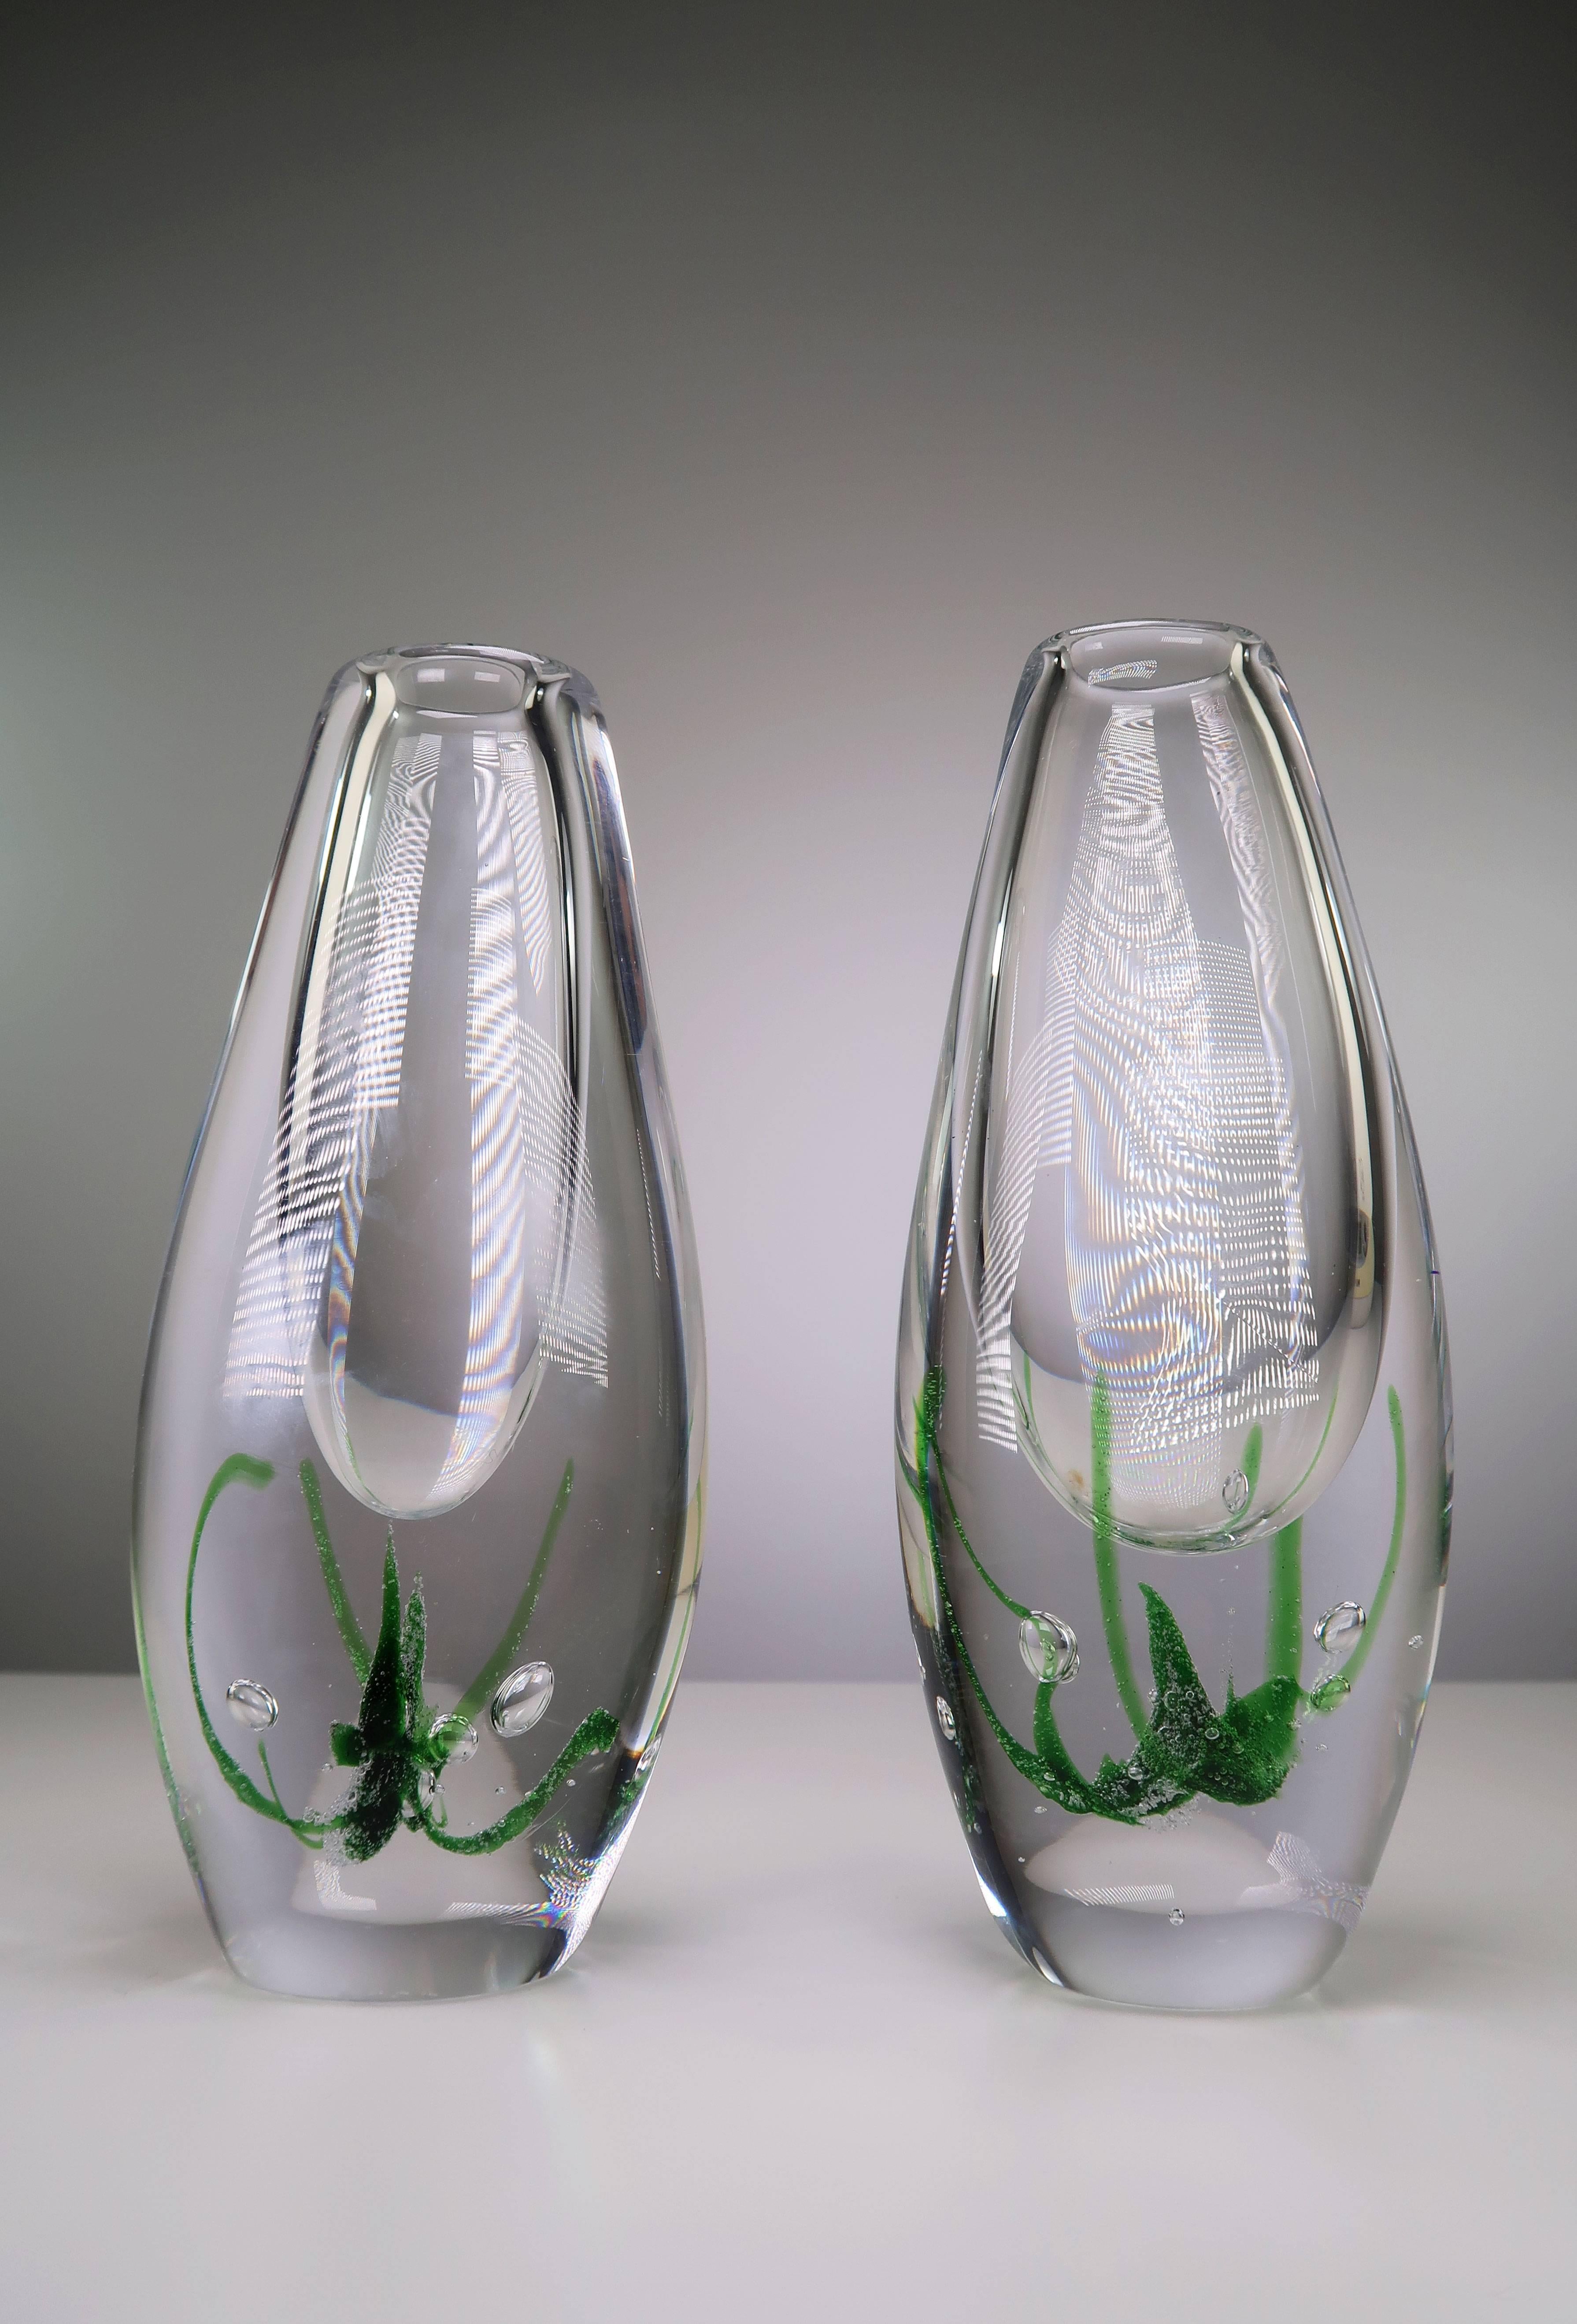 Stunning pair of Swedish Mid Century Modern Seaweed art glass vases by Swedish glass artist Vicke Lindstrand for Kosta in 1962. Superb examples of the Mykene technique that Lindstrand developed in the 1930s. Handblown vases so each item is unique in